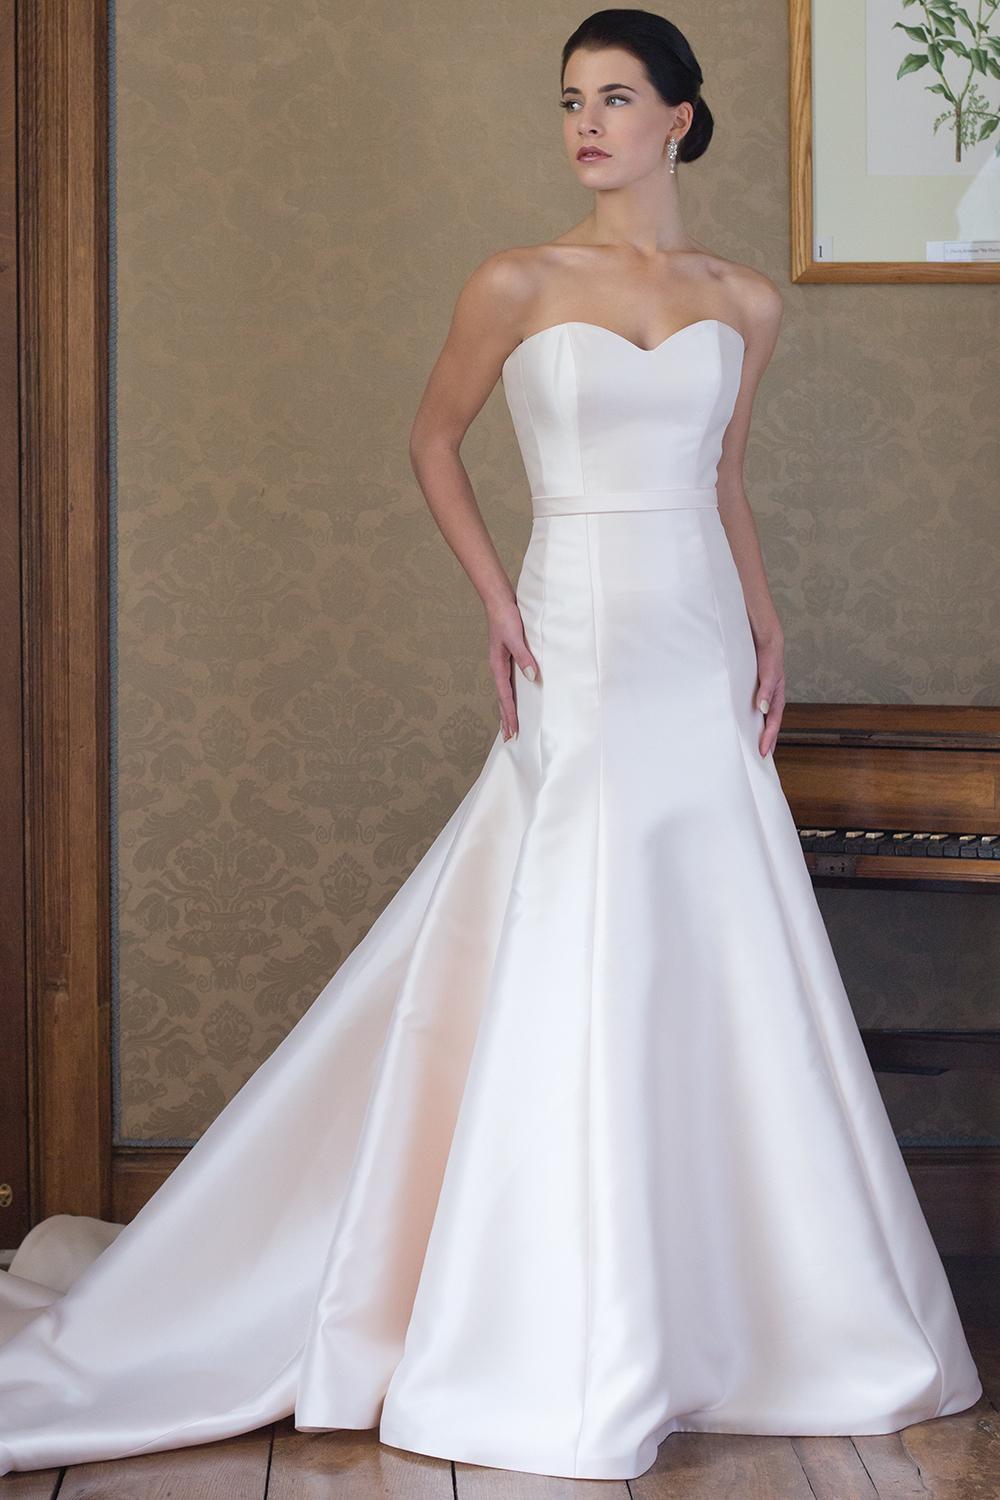 Classic Fit And Flare Wedding Dress Kleinfeld Bridal 5779